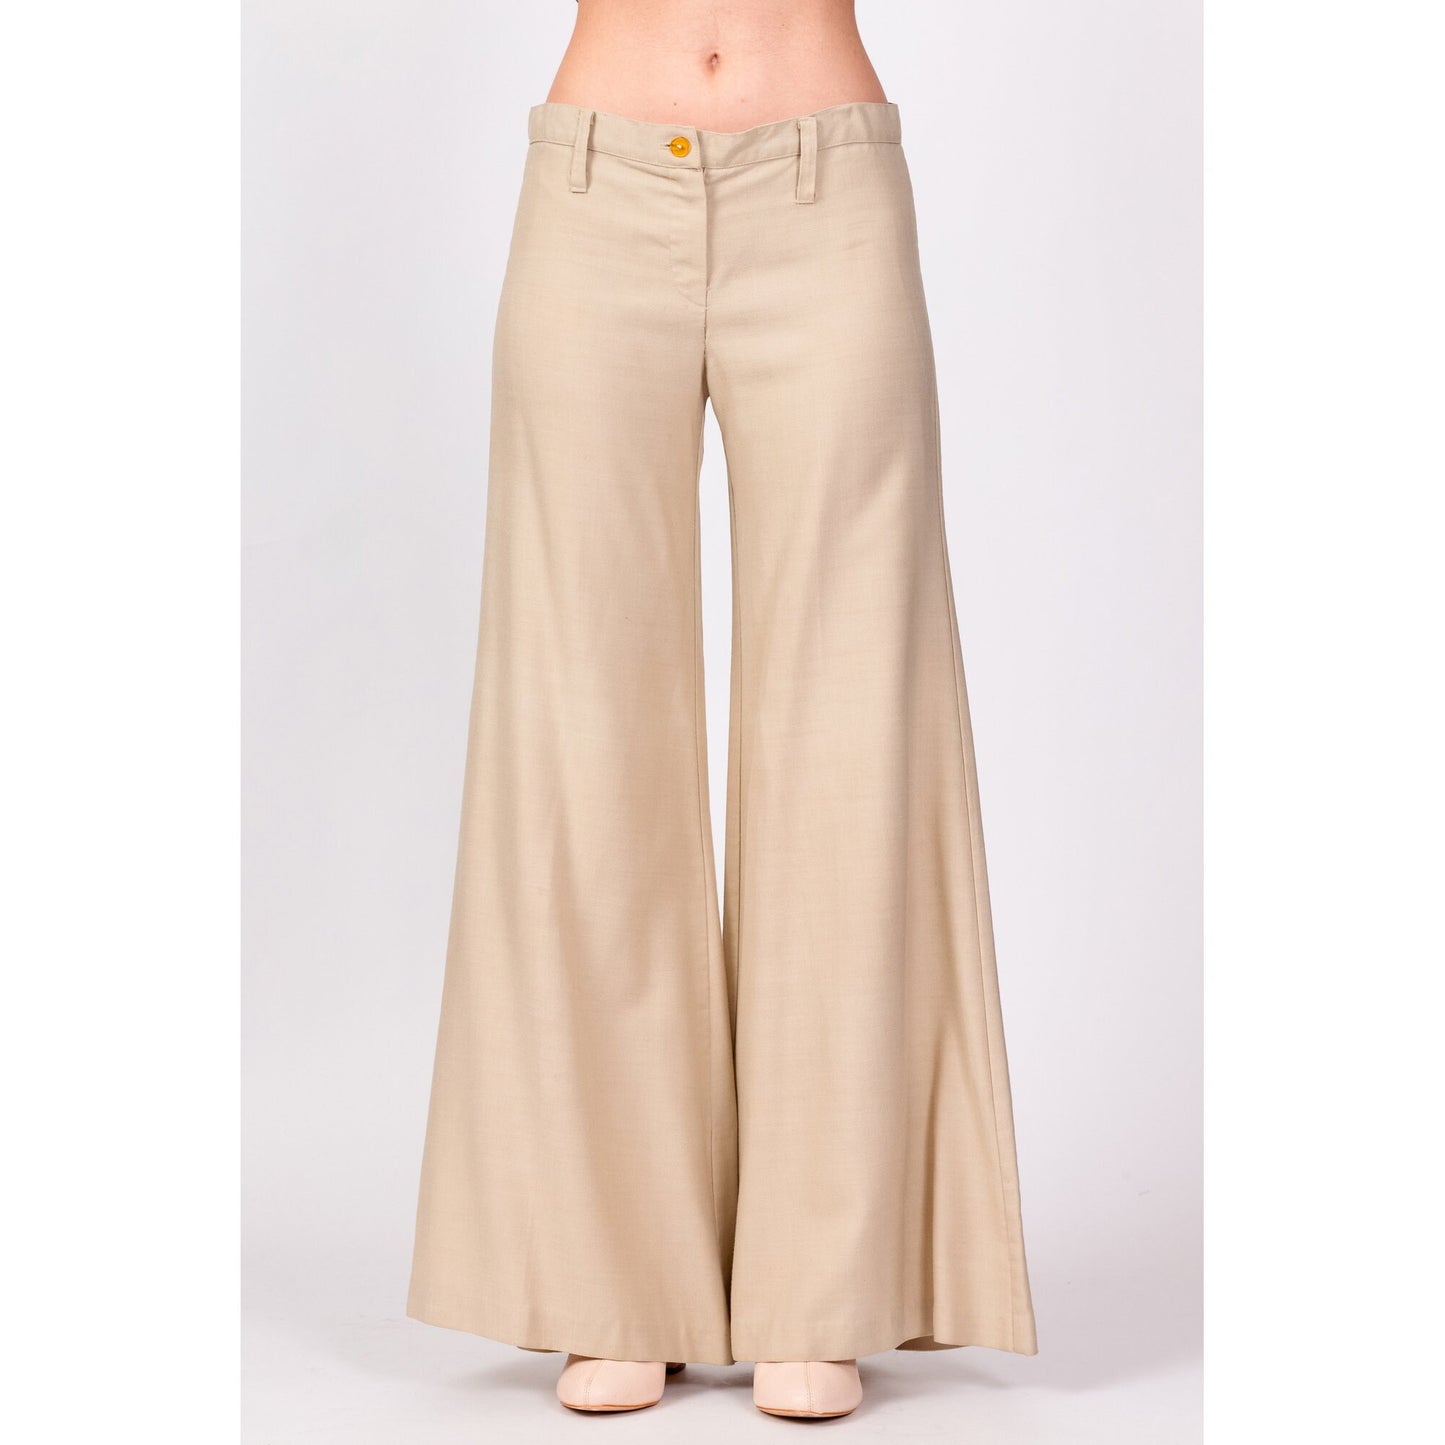 70s Khaki Low Rise Bell Bottoms - Extra Small 